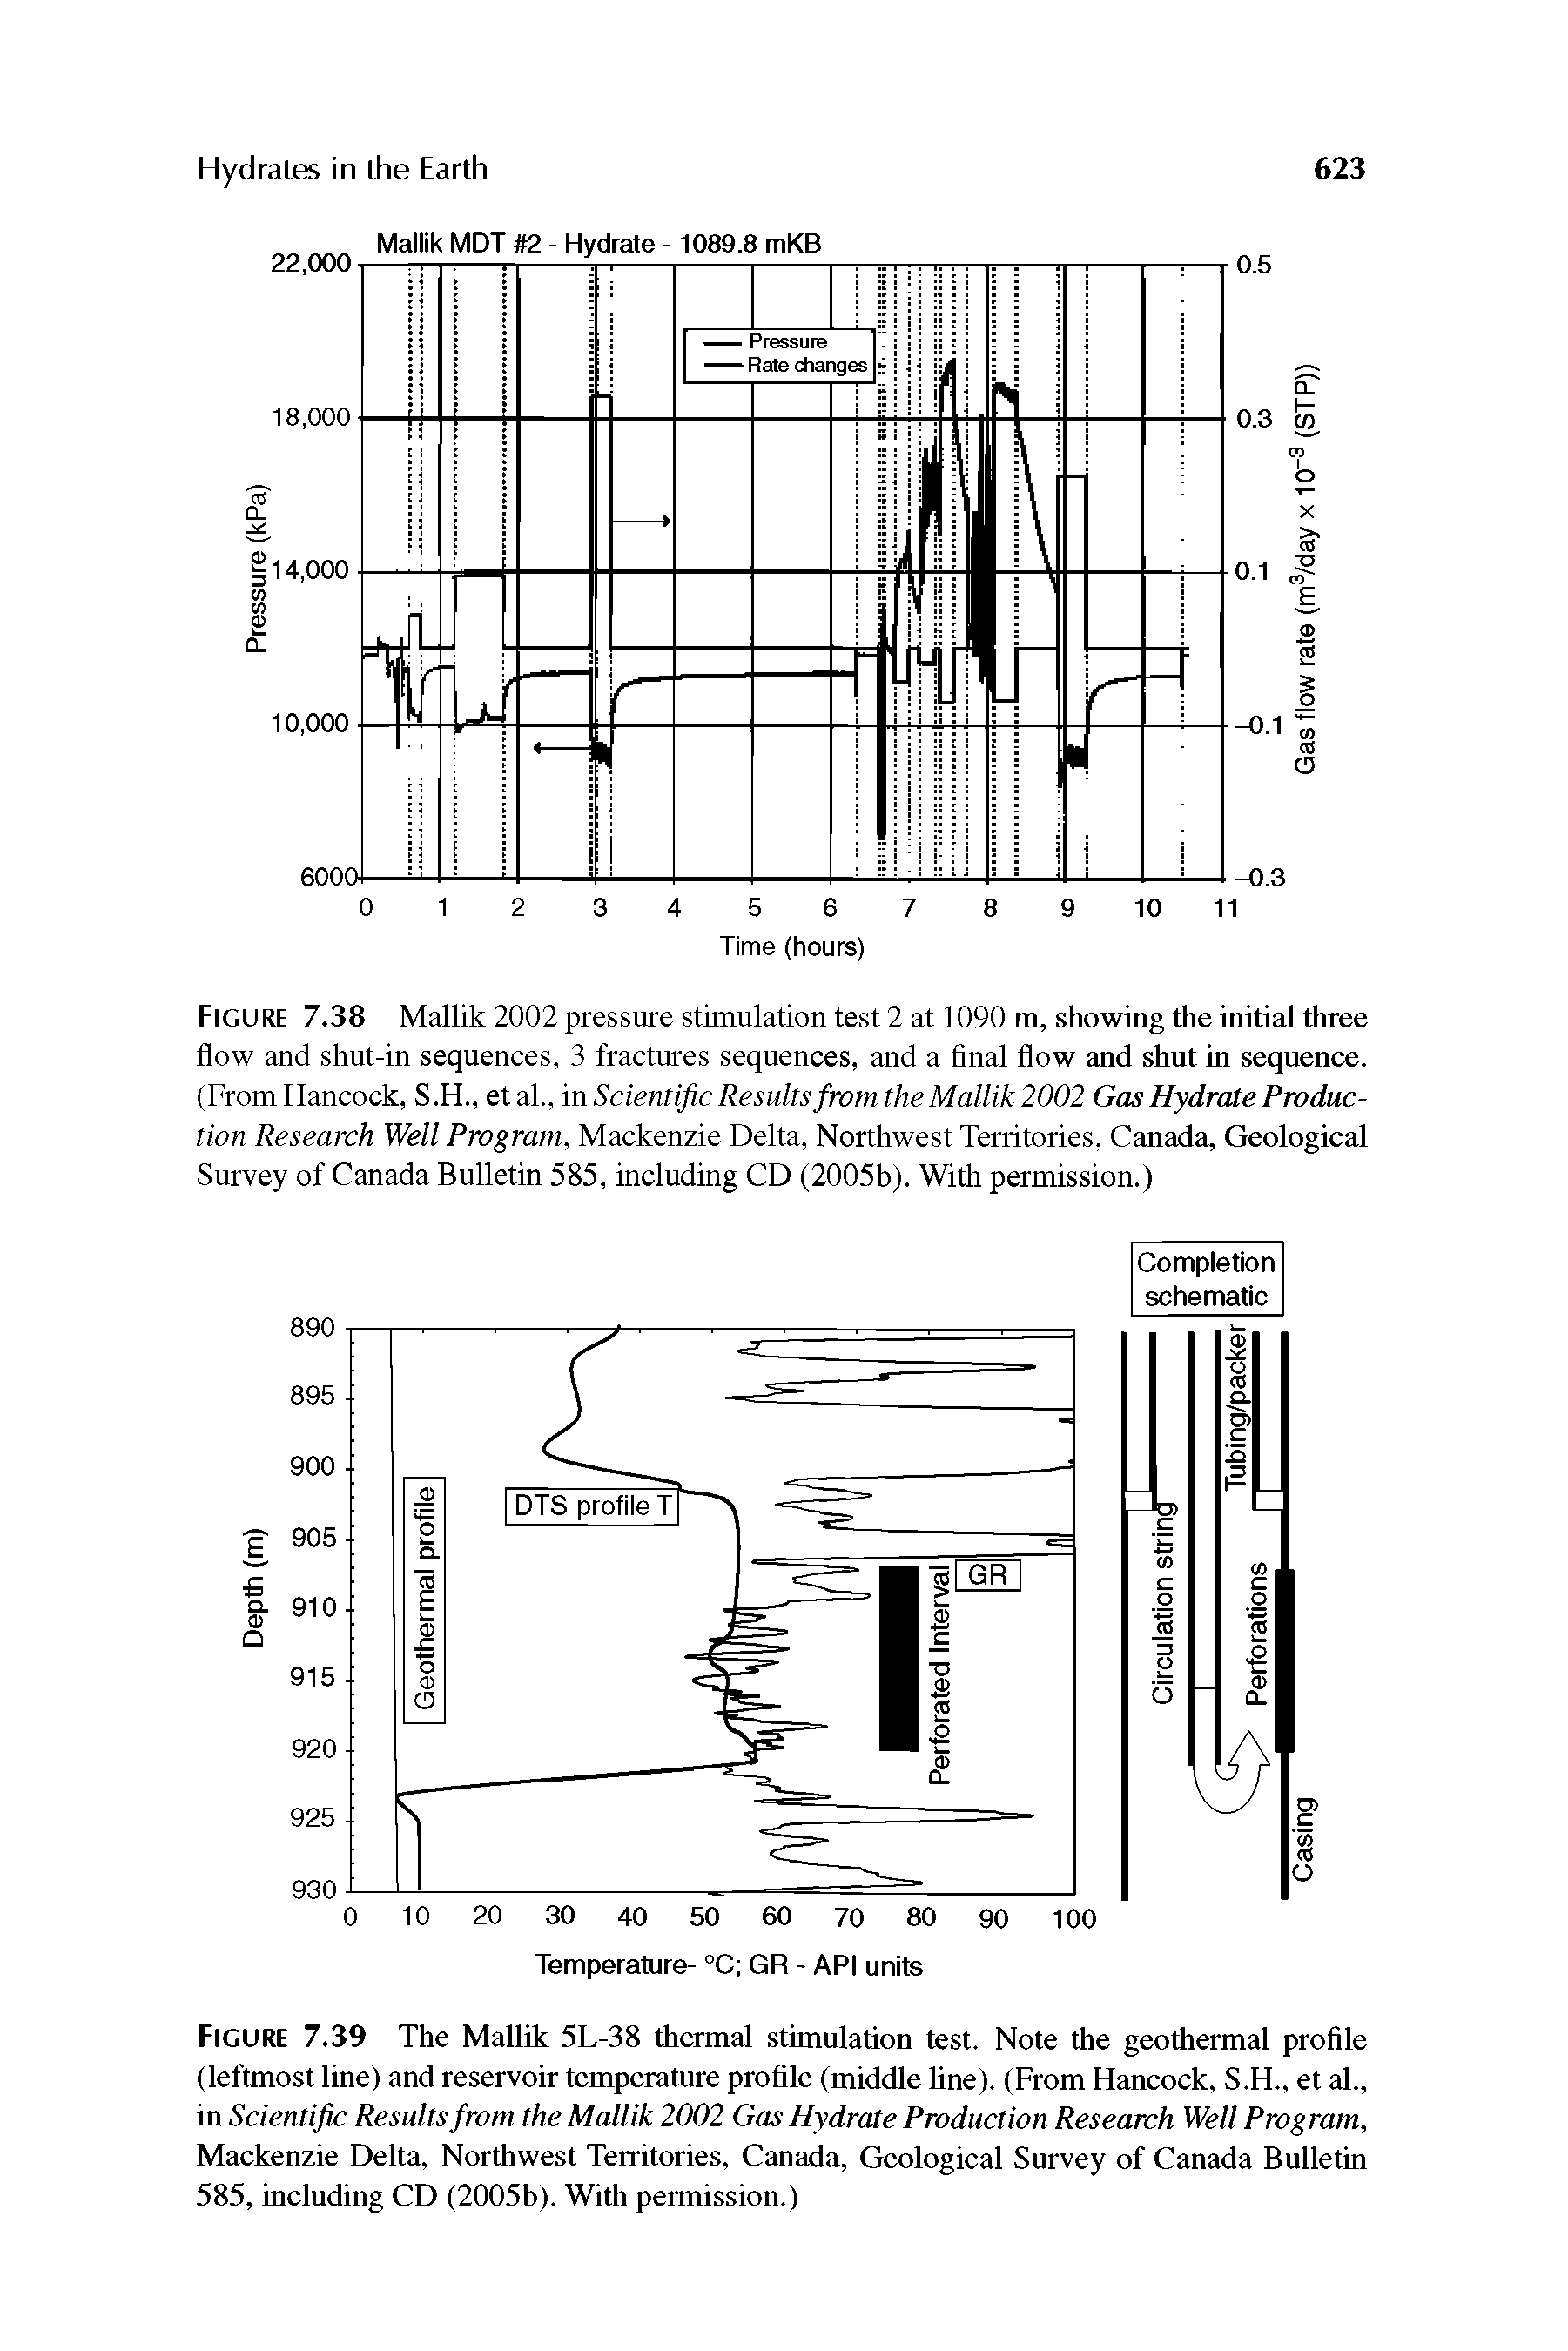 Figure 7.39 The Mallik 5L-38 thermal stimulation test. Note the geothermal profile (leftmost line) and reservoir temperature profile (middle fine). (From Hancock, S.H., et al., in Scientific Results from the Mallik 2002 Gas Hydrate Production Research Well Program, Mackenzie Delta, Northwest Territories, Canada, Geological Survey of Canada Bulletin 585, including CD (2005b). With permission.)...